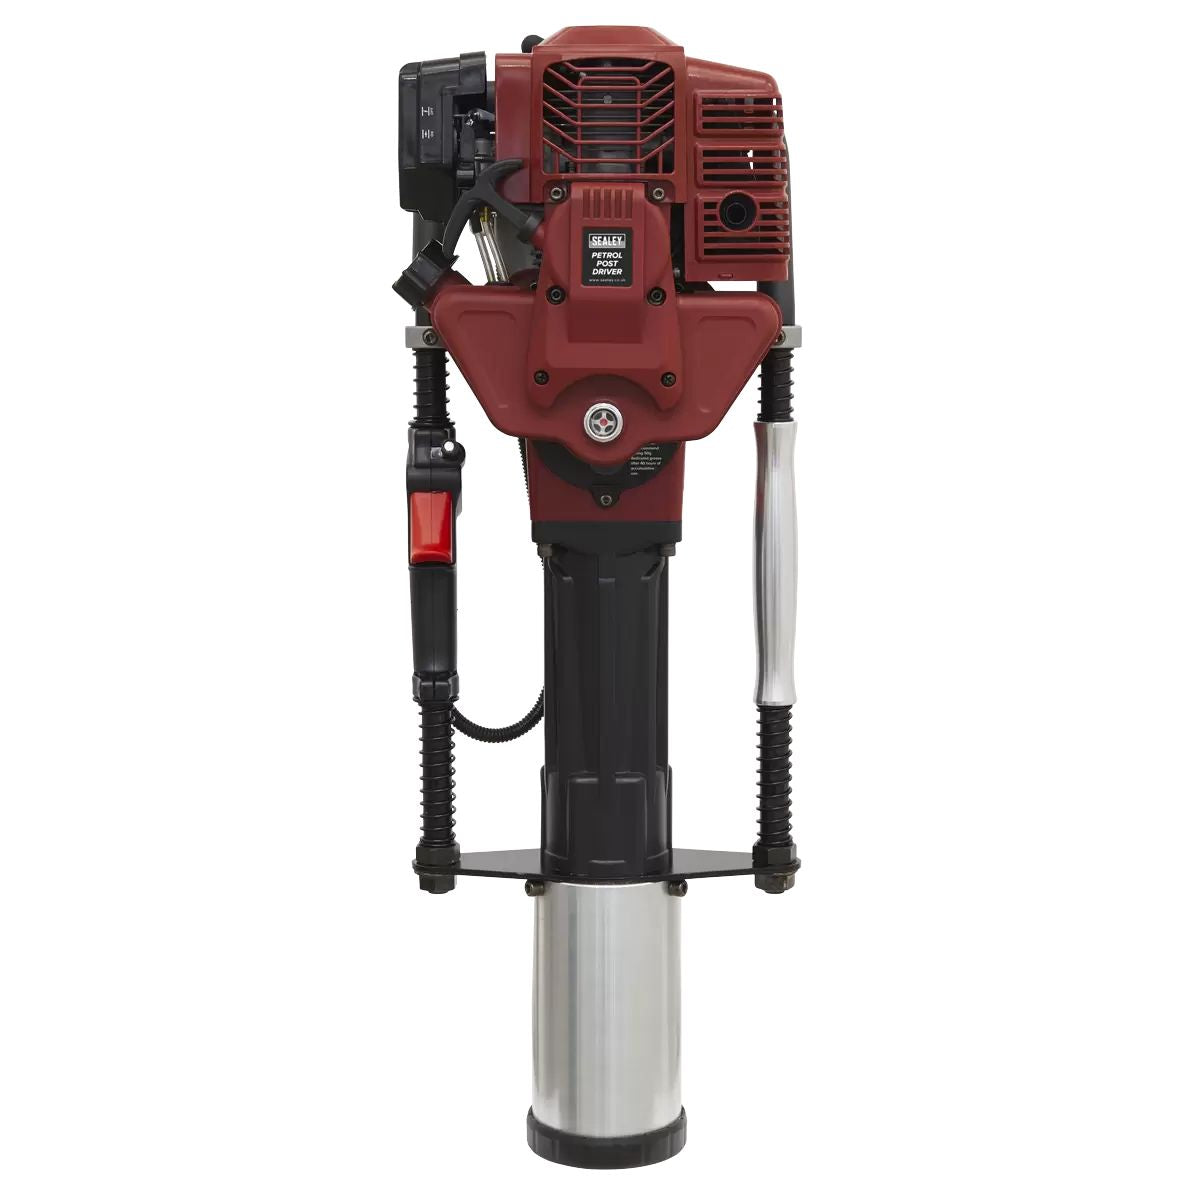 Sealey PPD100 2-Stroke Petrol Post Driver 100mm